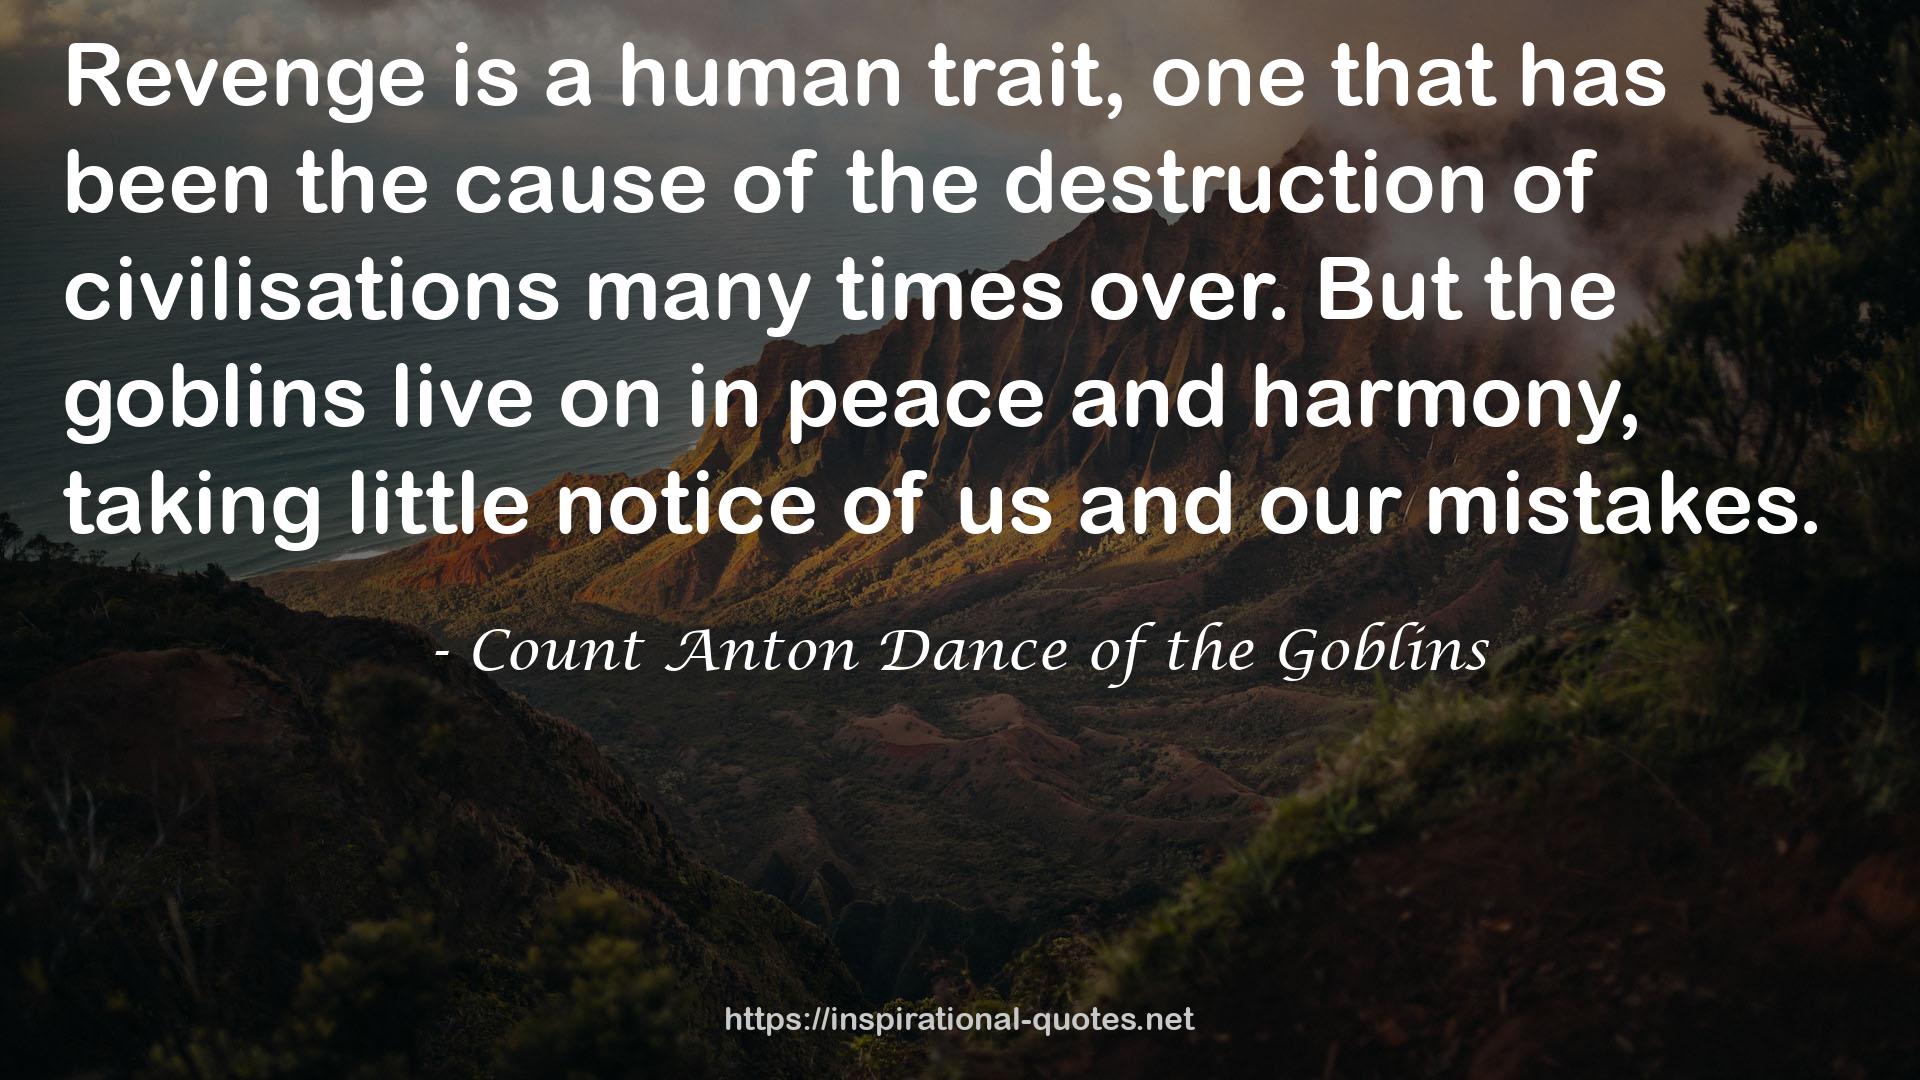 Count Anton Dance of the Goblins QUOTES